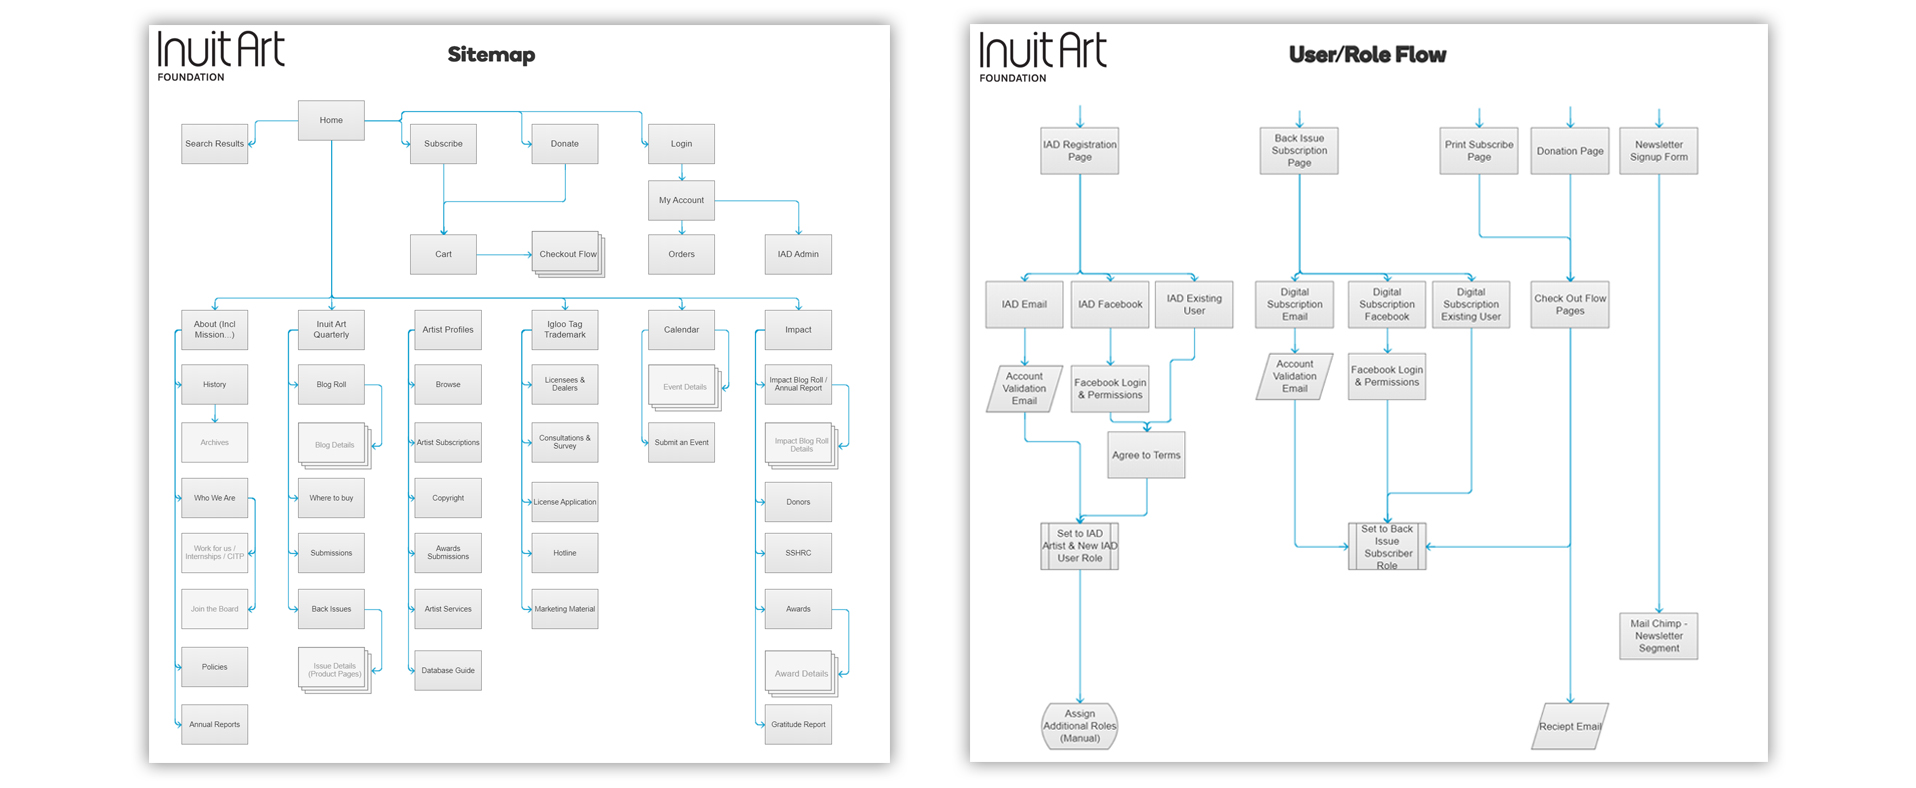 Hand drawn wireframe and information Architecture for Inuit Art Foundation&#39;s website